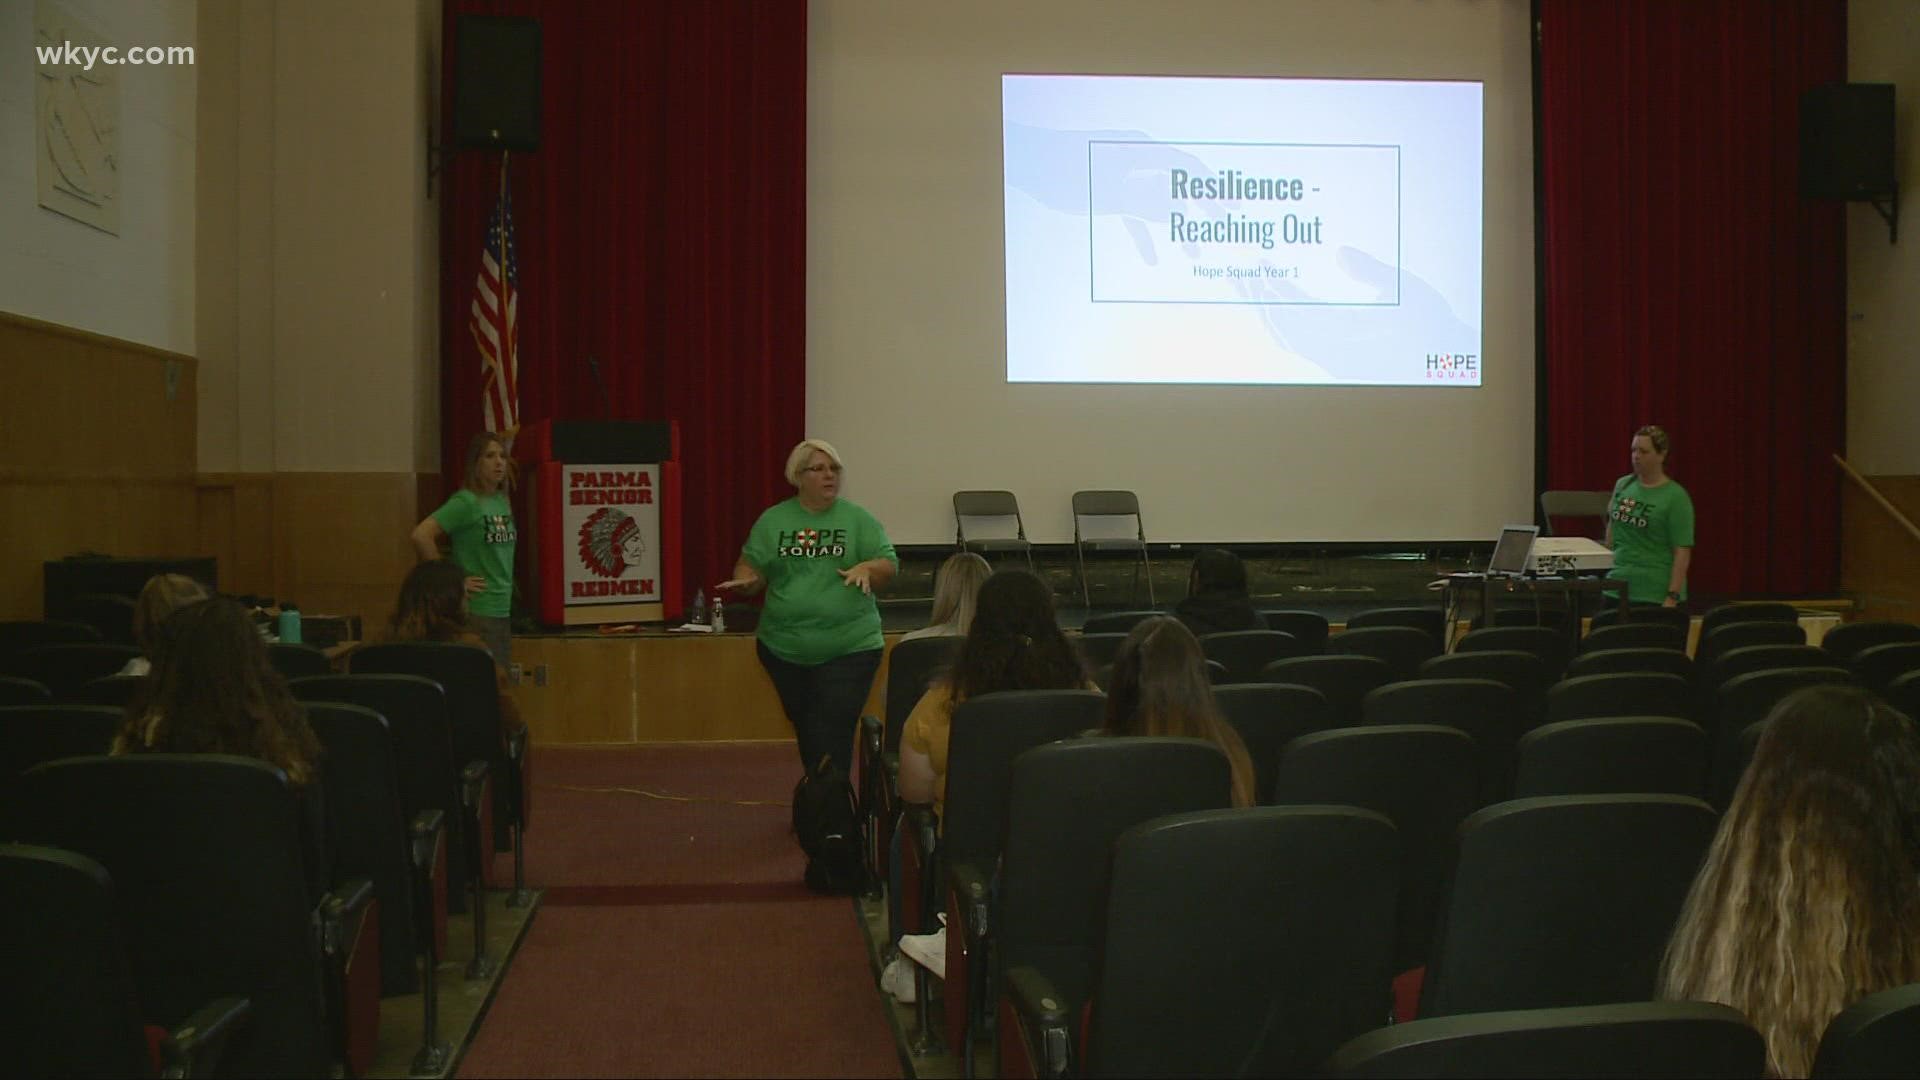 Parma Senior High will also hold a mental health summit for hundreds of students on Nov. 22.